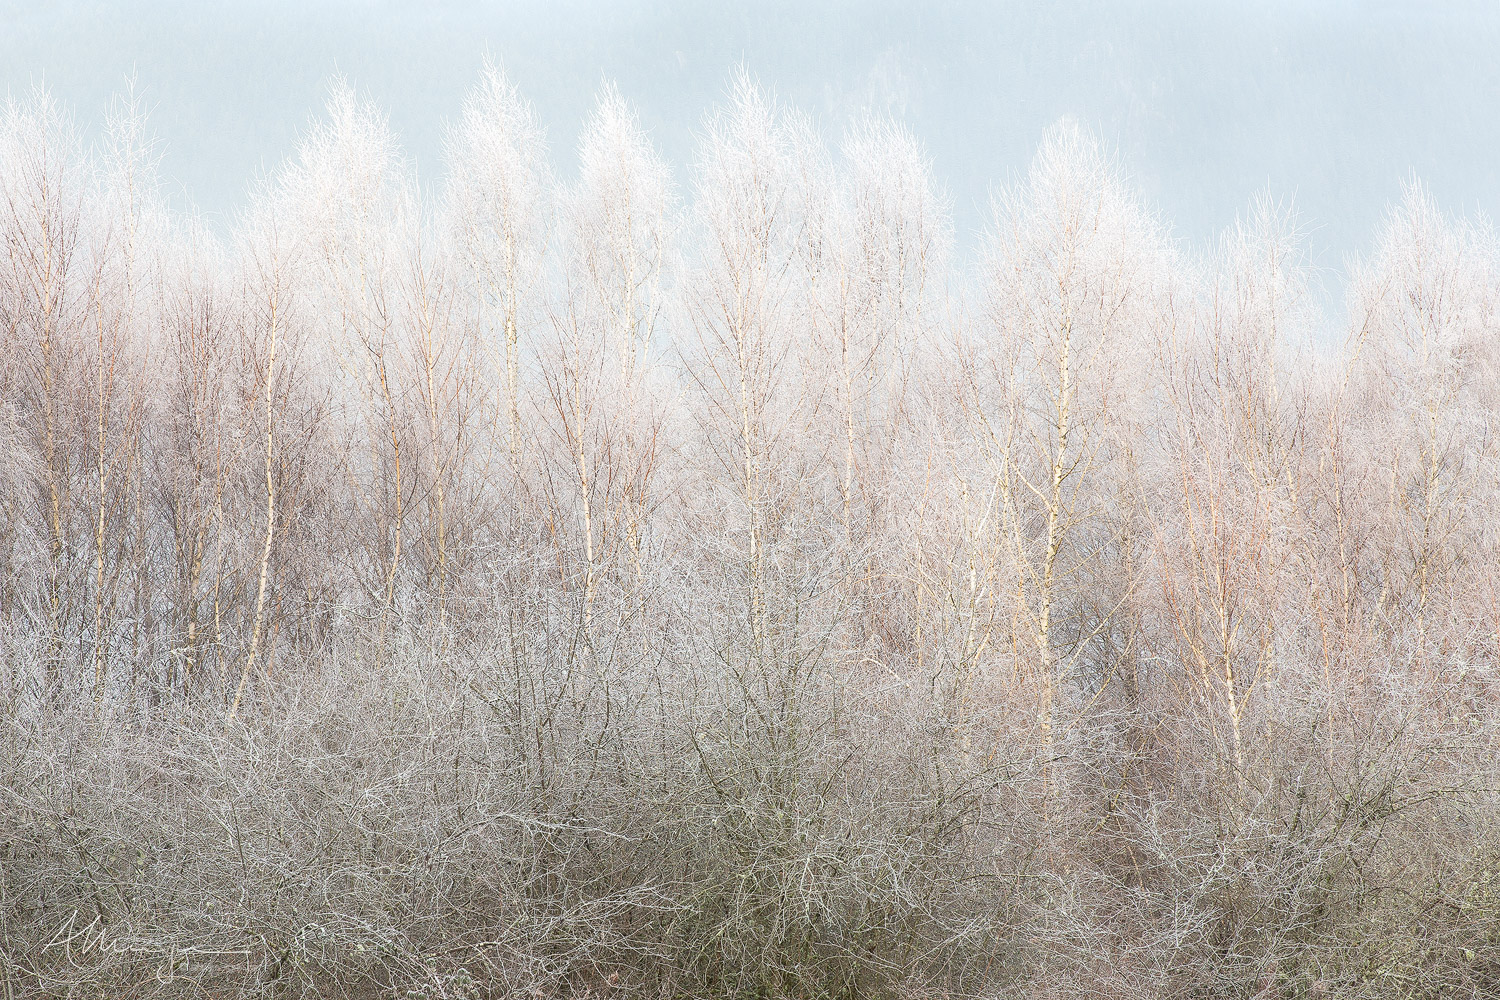 winter trees with bare branches, covered in a layer of rime ice.